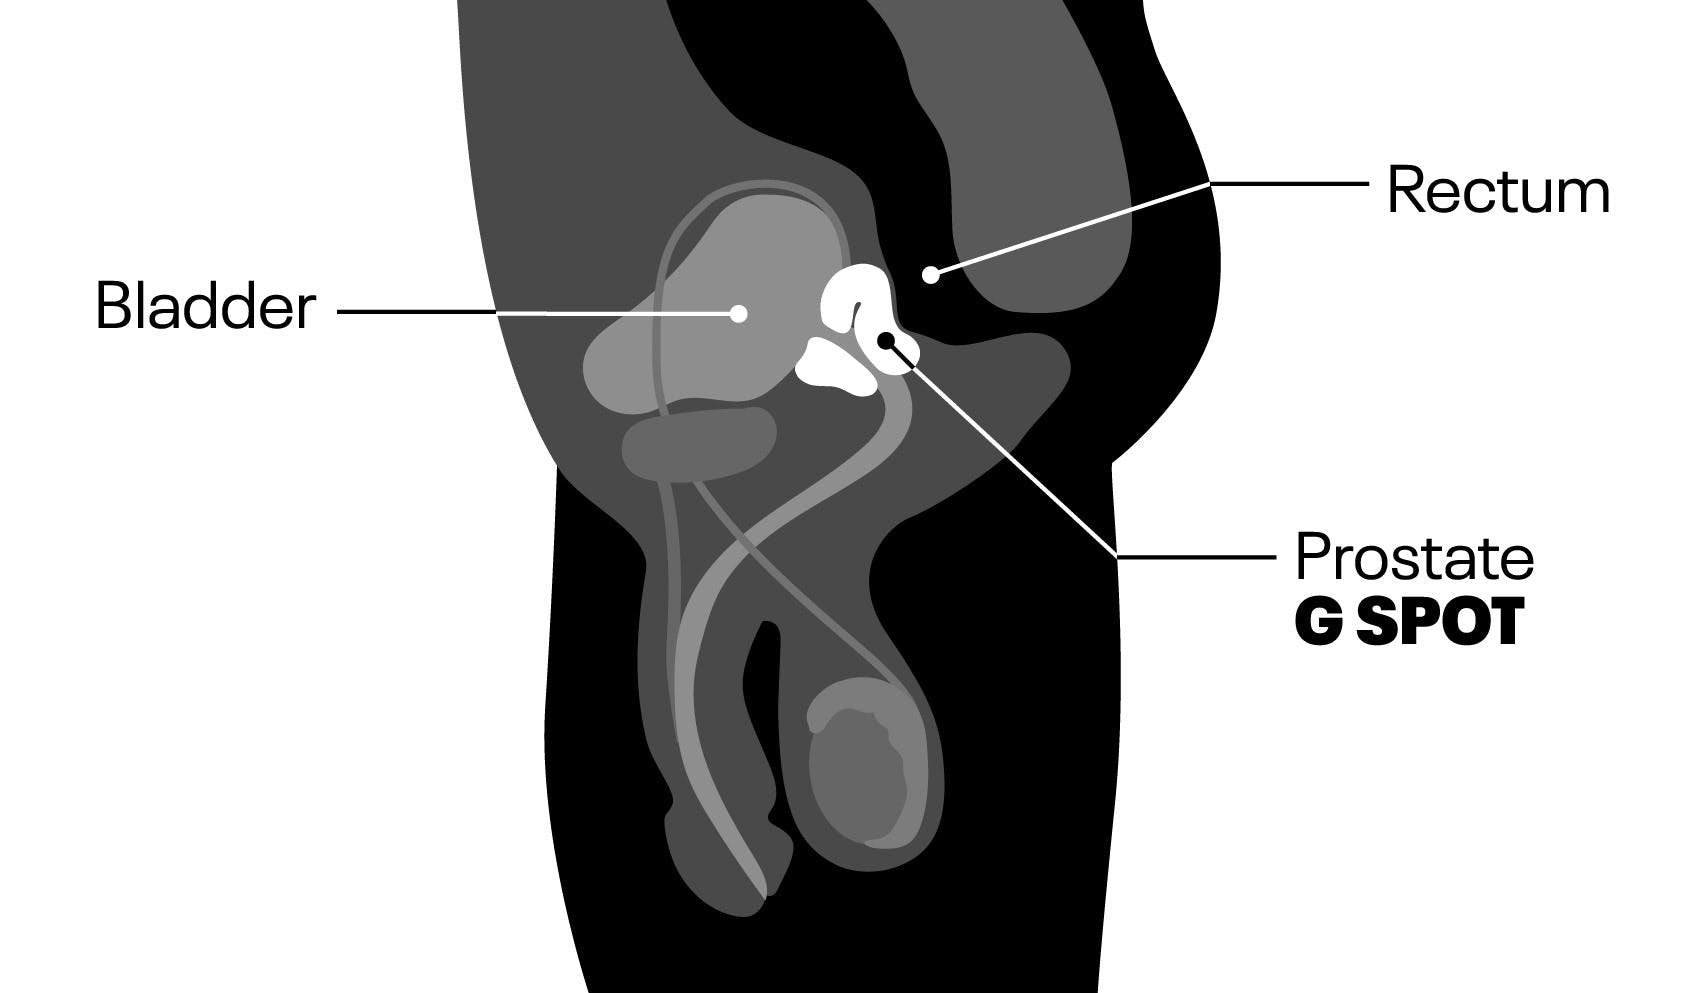 Anatomical diagram showing the location of the male G-spot